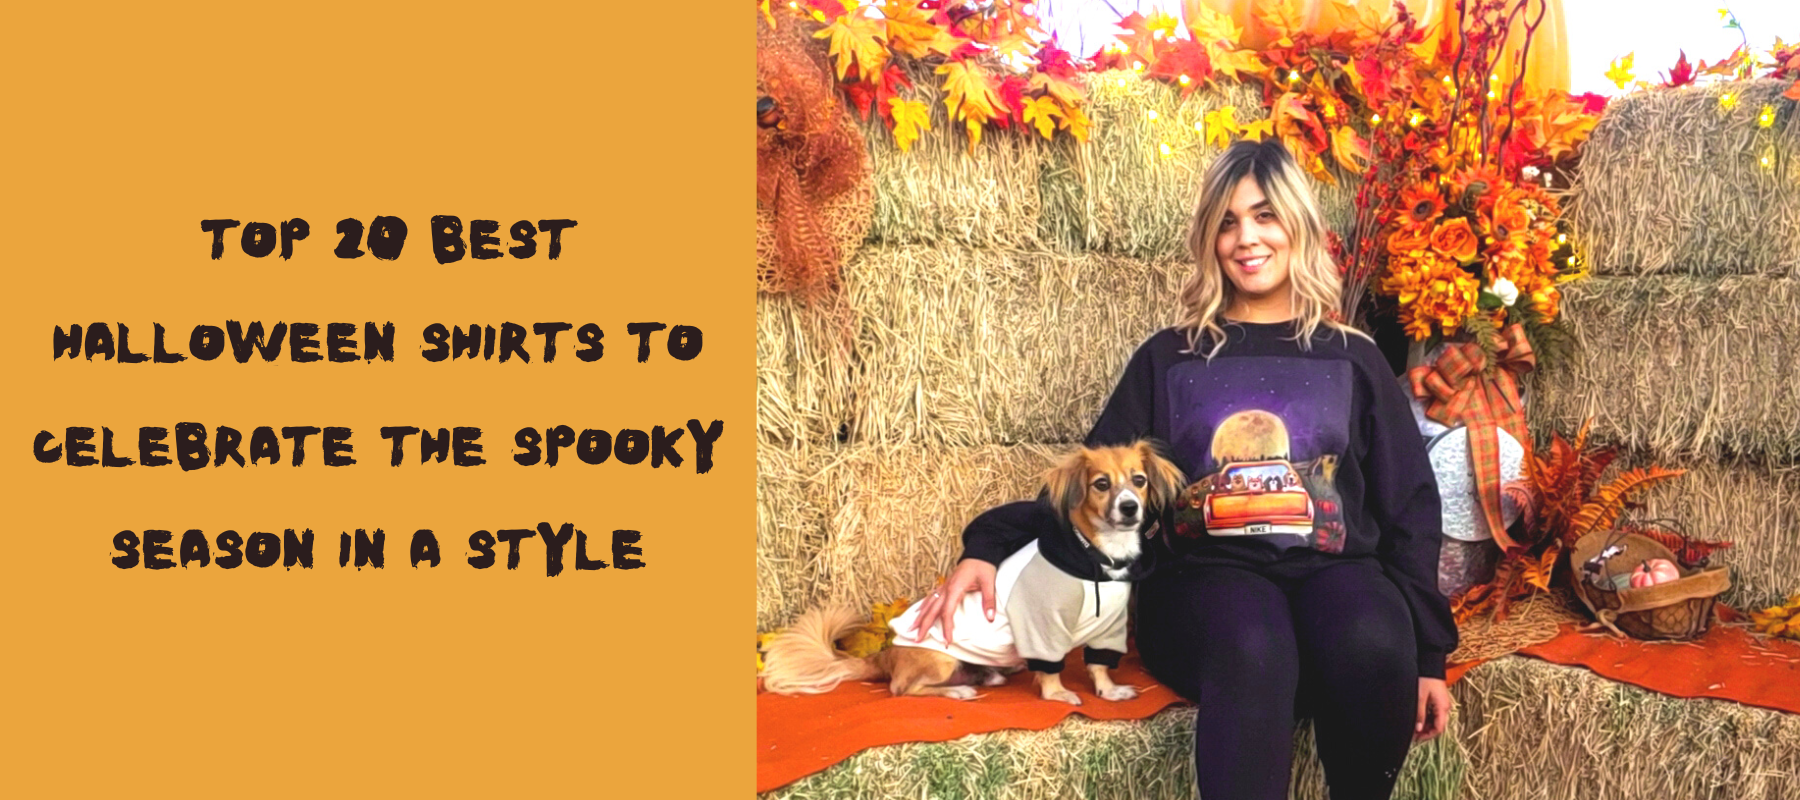 Top 20 Best Halloween Shirts to Celebrate the Spooky Season in a Style | Unifury